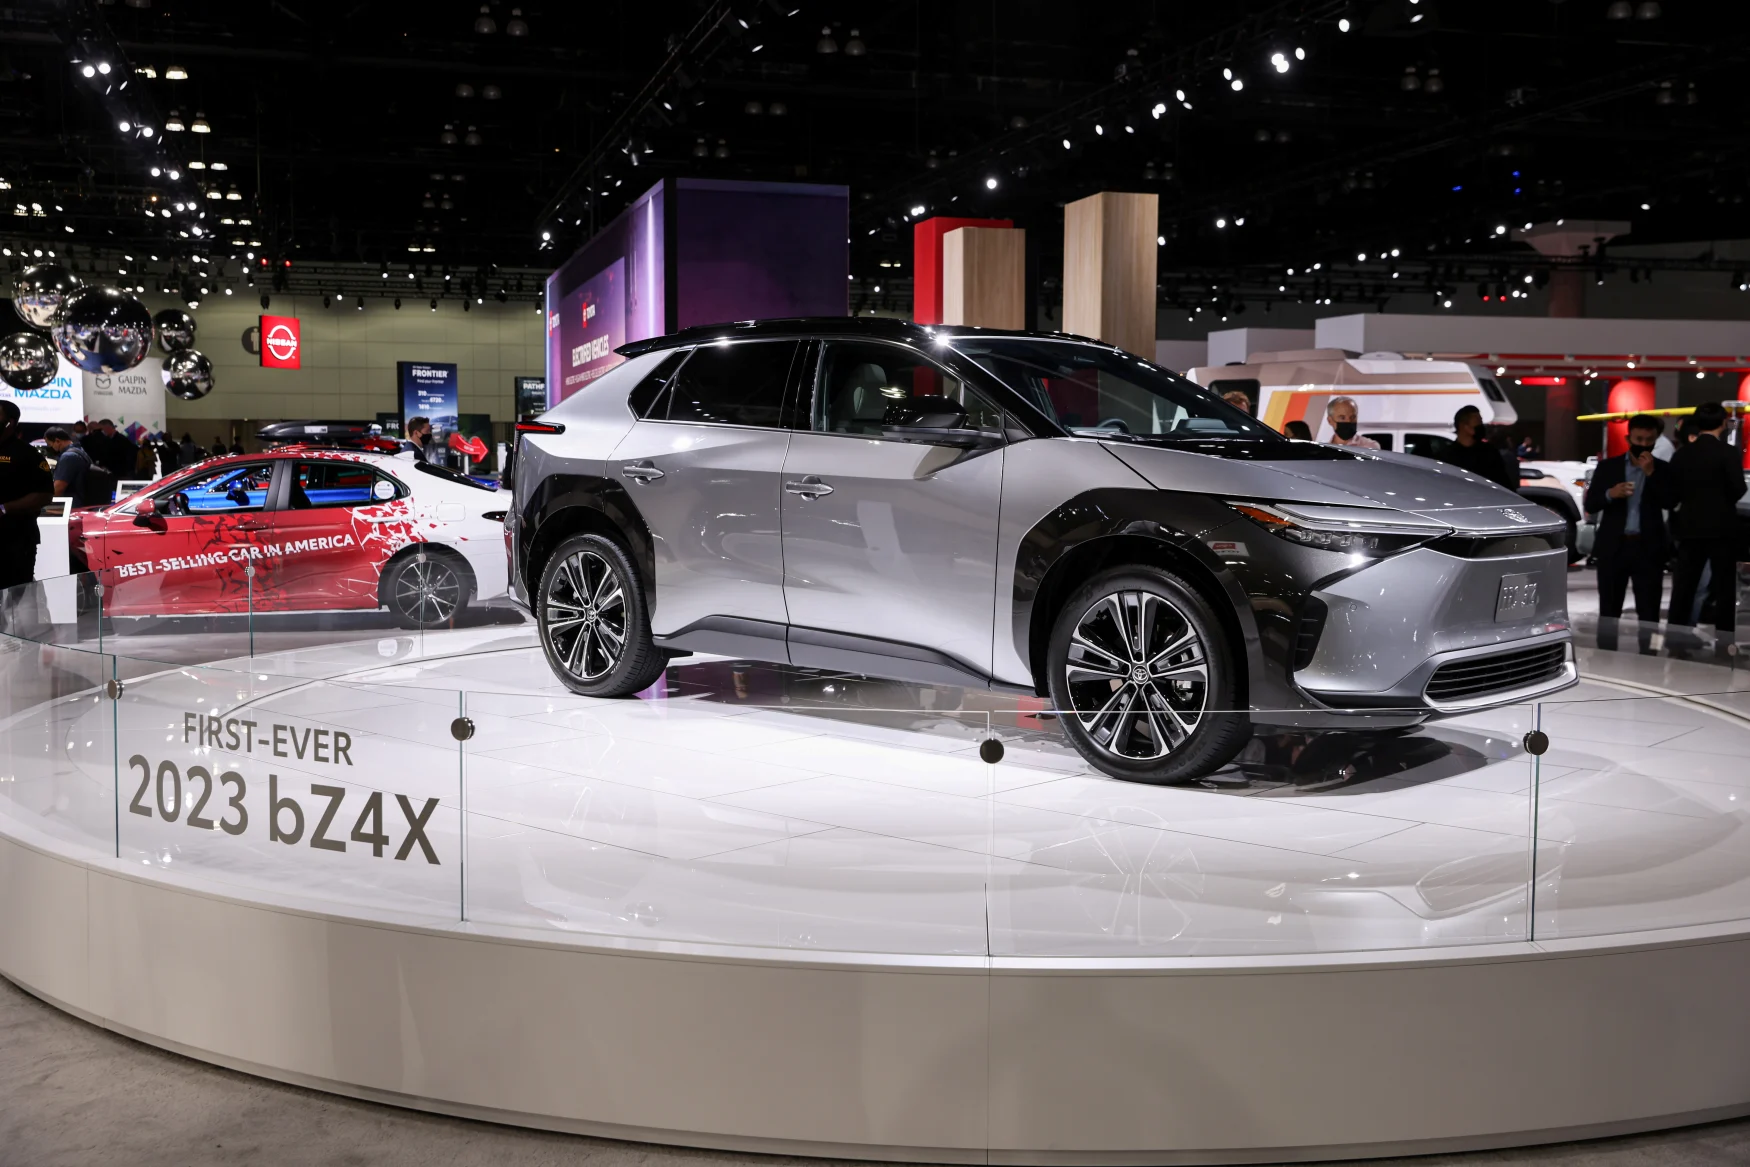 The 2023 Toyota bZ4X all-electric SUV is on display at the 2021 LA Auto Show on November 17, 2021 in Los Angeles, California, United States.  REUTERS/Mike Blake